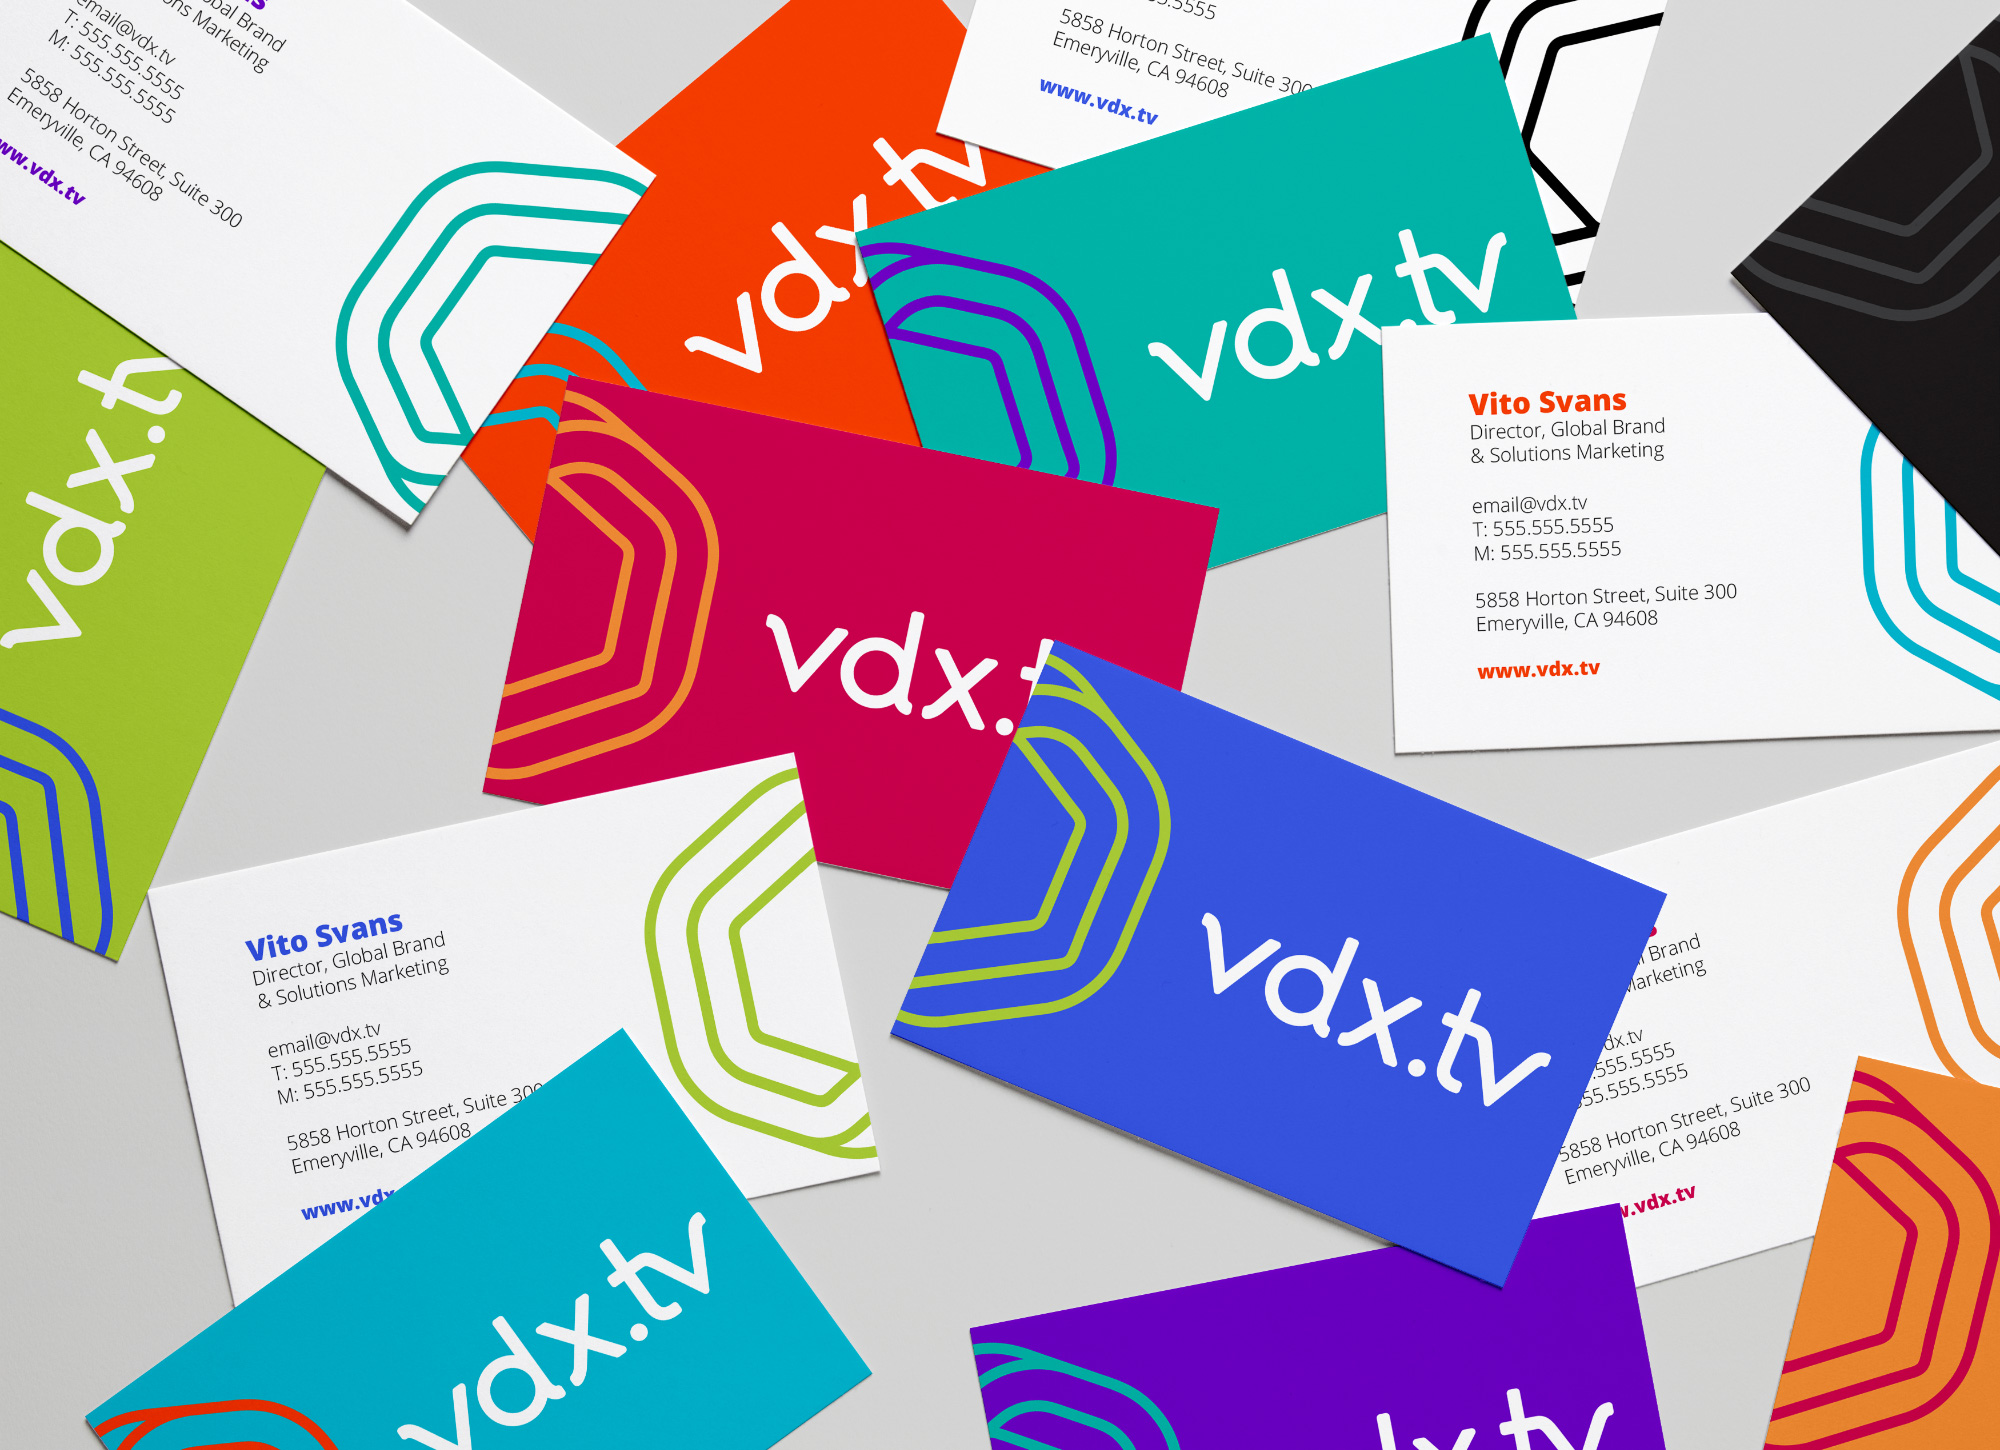 VDX.tv business cards in different color-ways